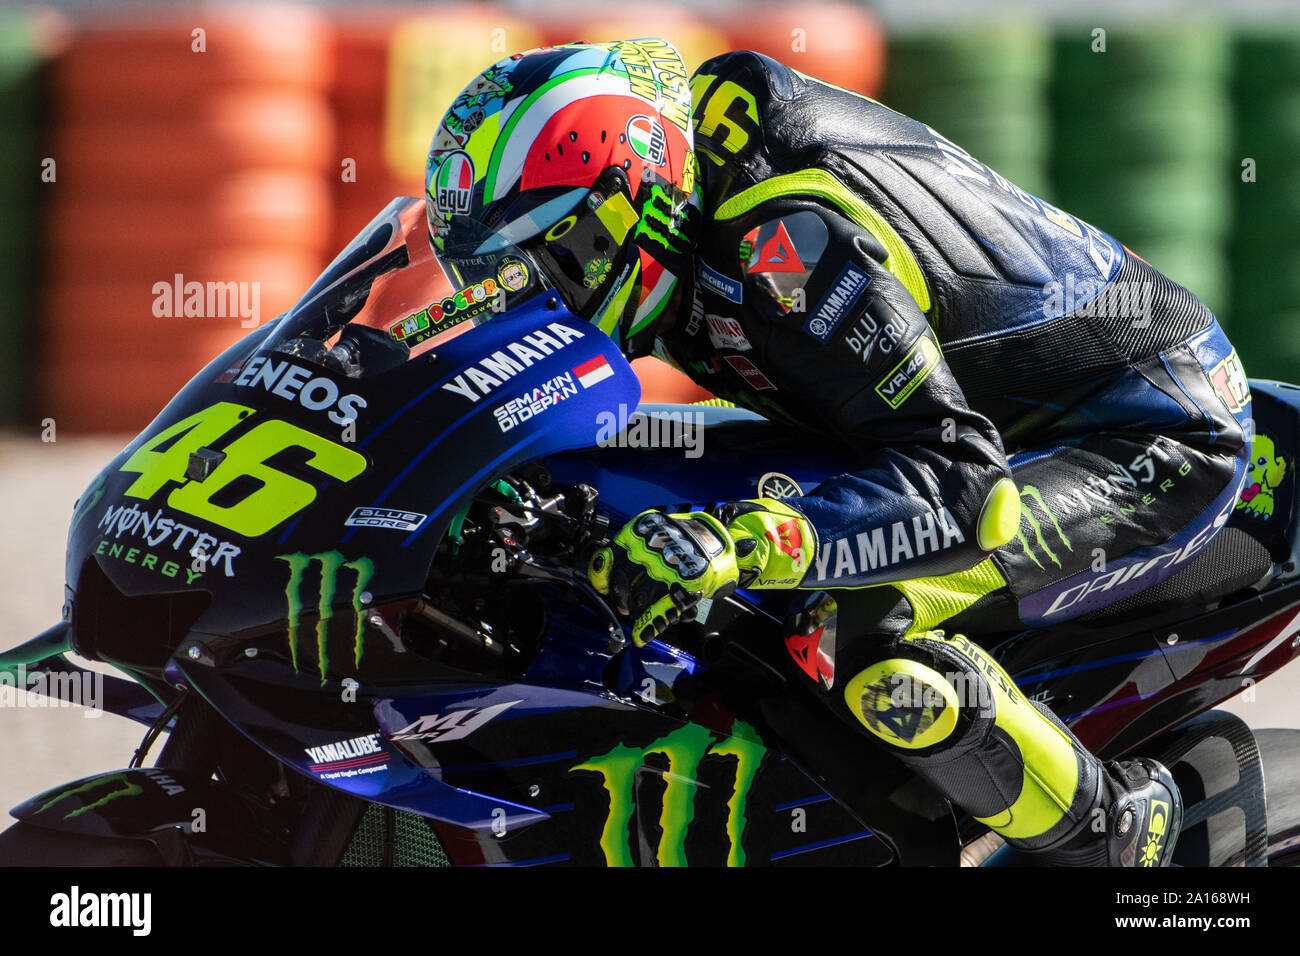 Italy. 14th Sep, 2019. Valentino Rossi, Italian MotoGP Rider number 46 (with special celebrative helmet Misano) for Yamaha Monster (Photo by Lorenzo Di Cola/Pacific Press) Credit: Pacific Press Agency/Alamy